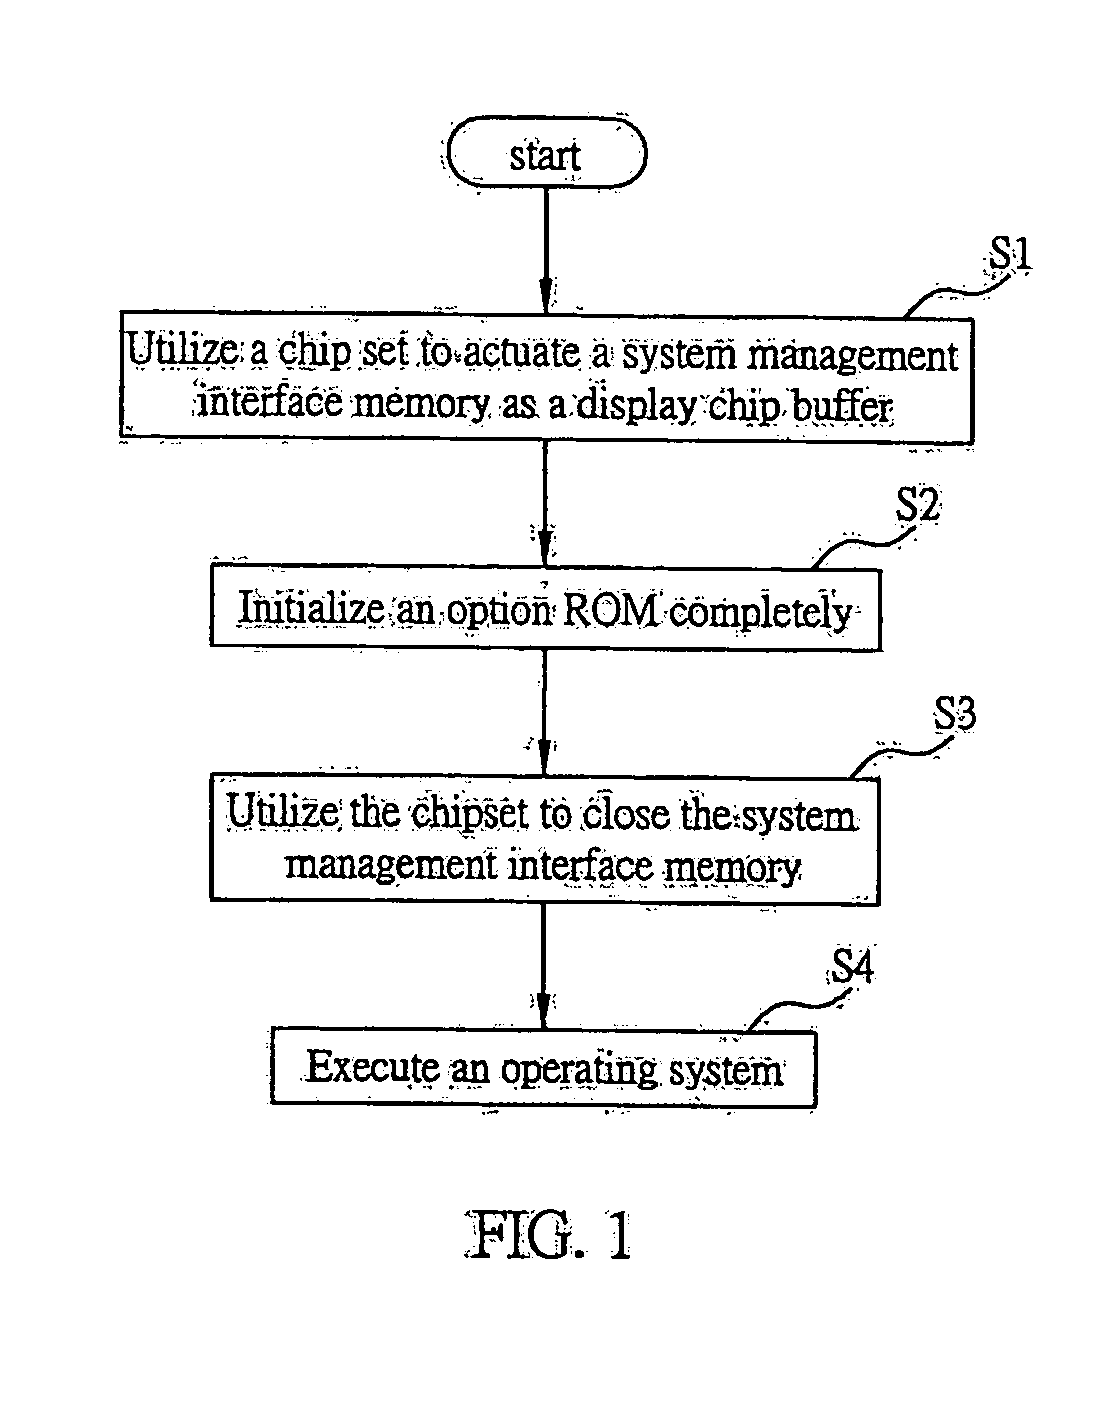 Initialization picture displaying method